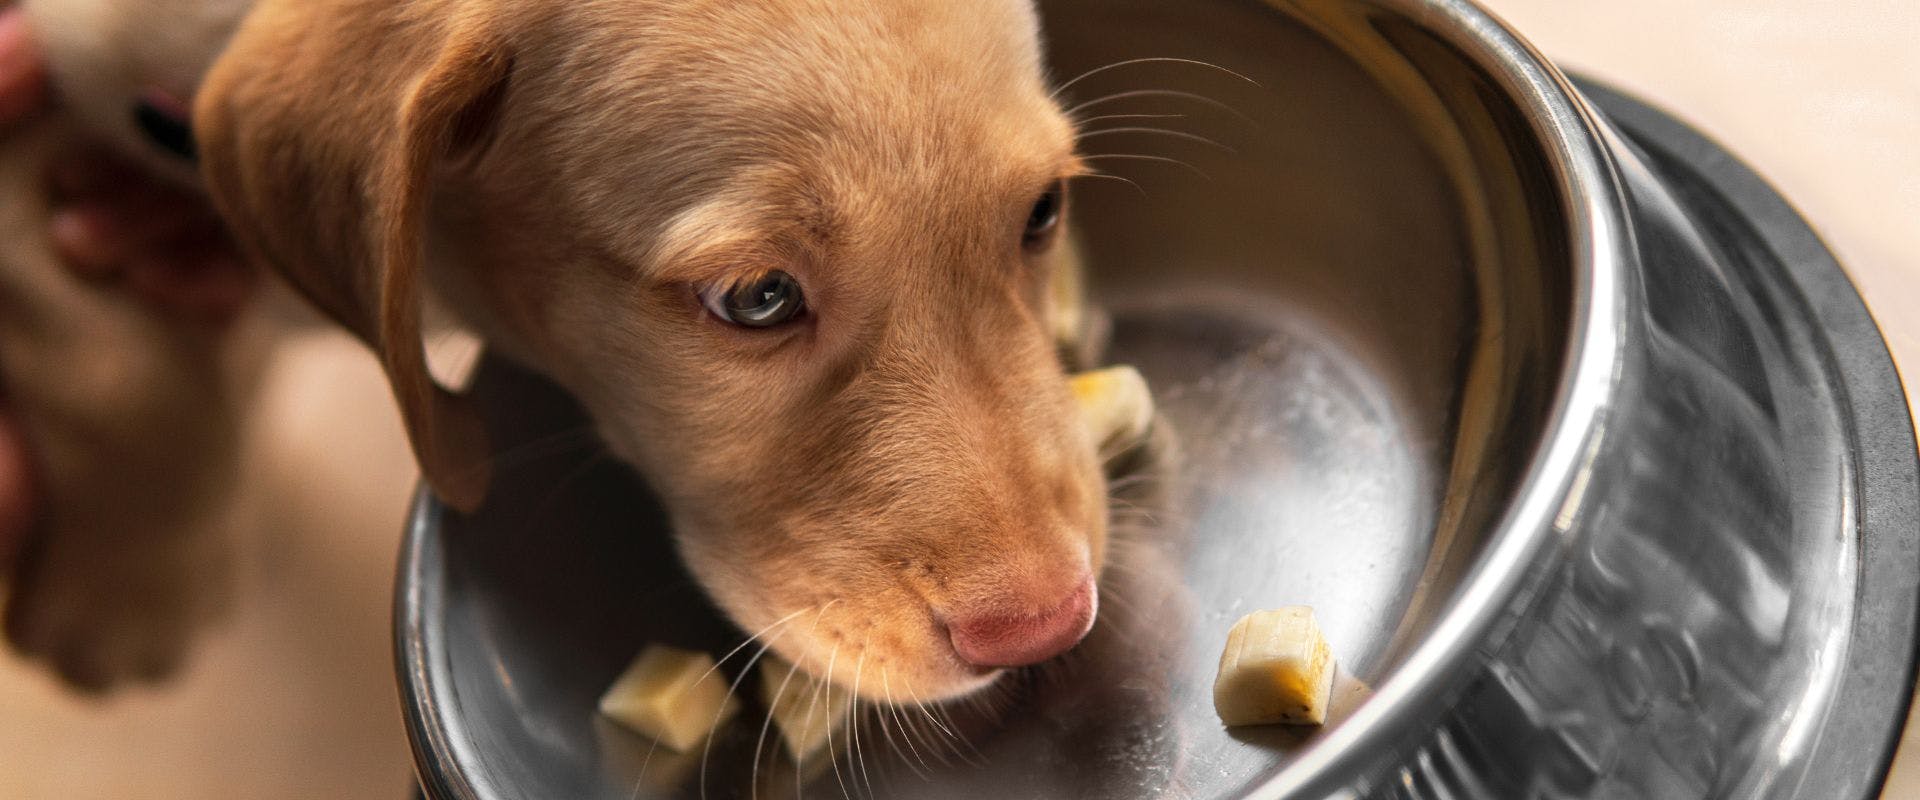 Puppy eating banana from a metal bowl